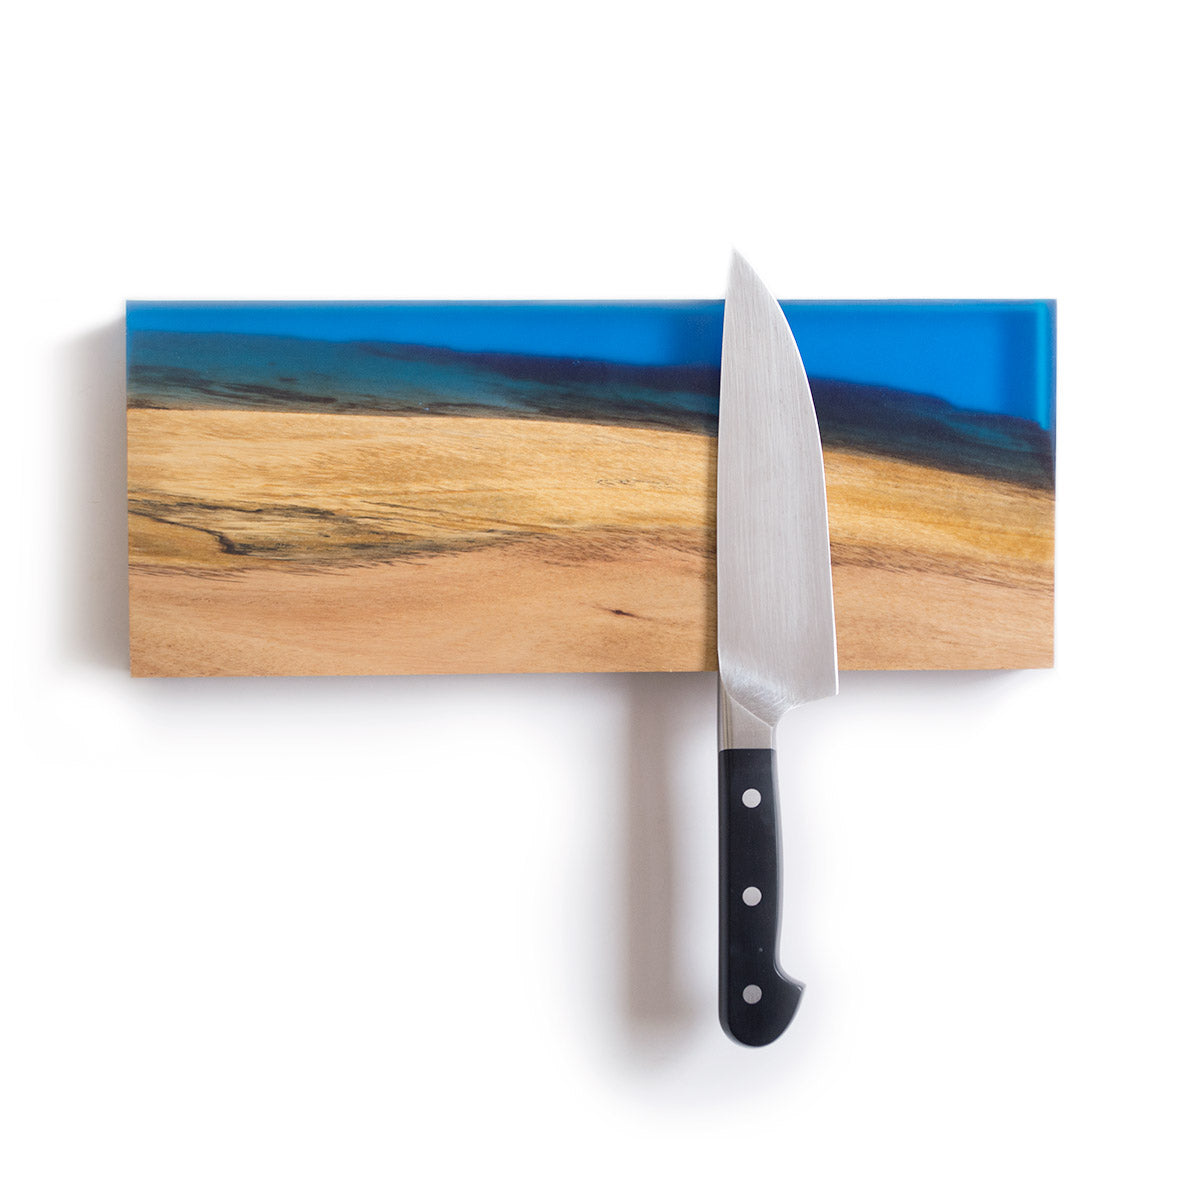 magnetic knife holder strip made from live edge acacia wood and transparent blue epoxy resin